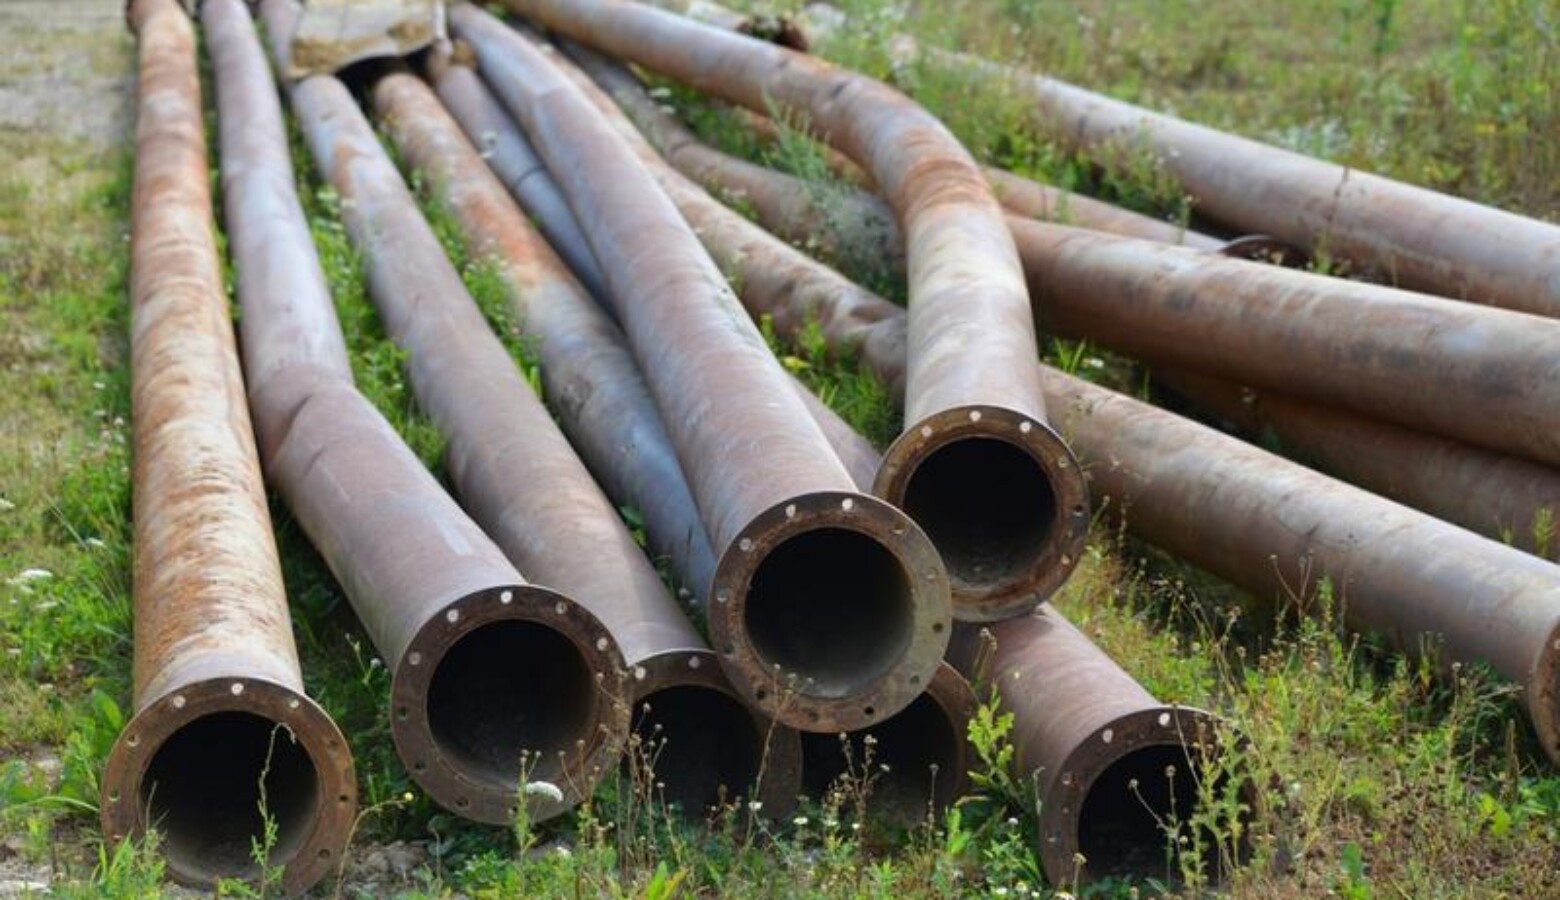 The Biden administration's budget proposal includes replacing all lead water pipes and service lines. (Pixabay)